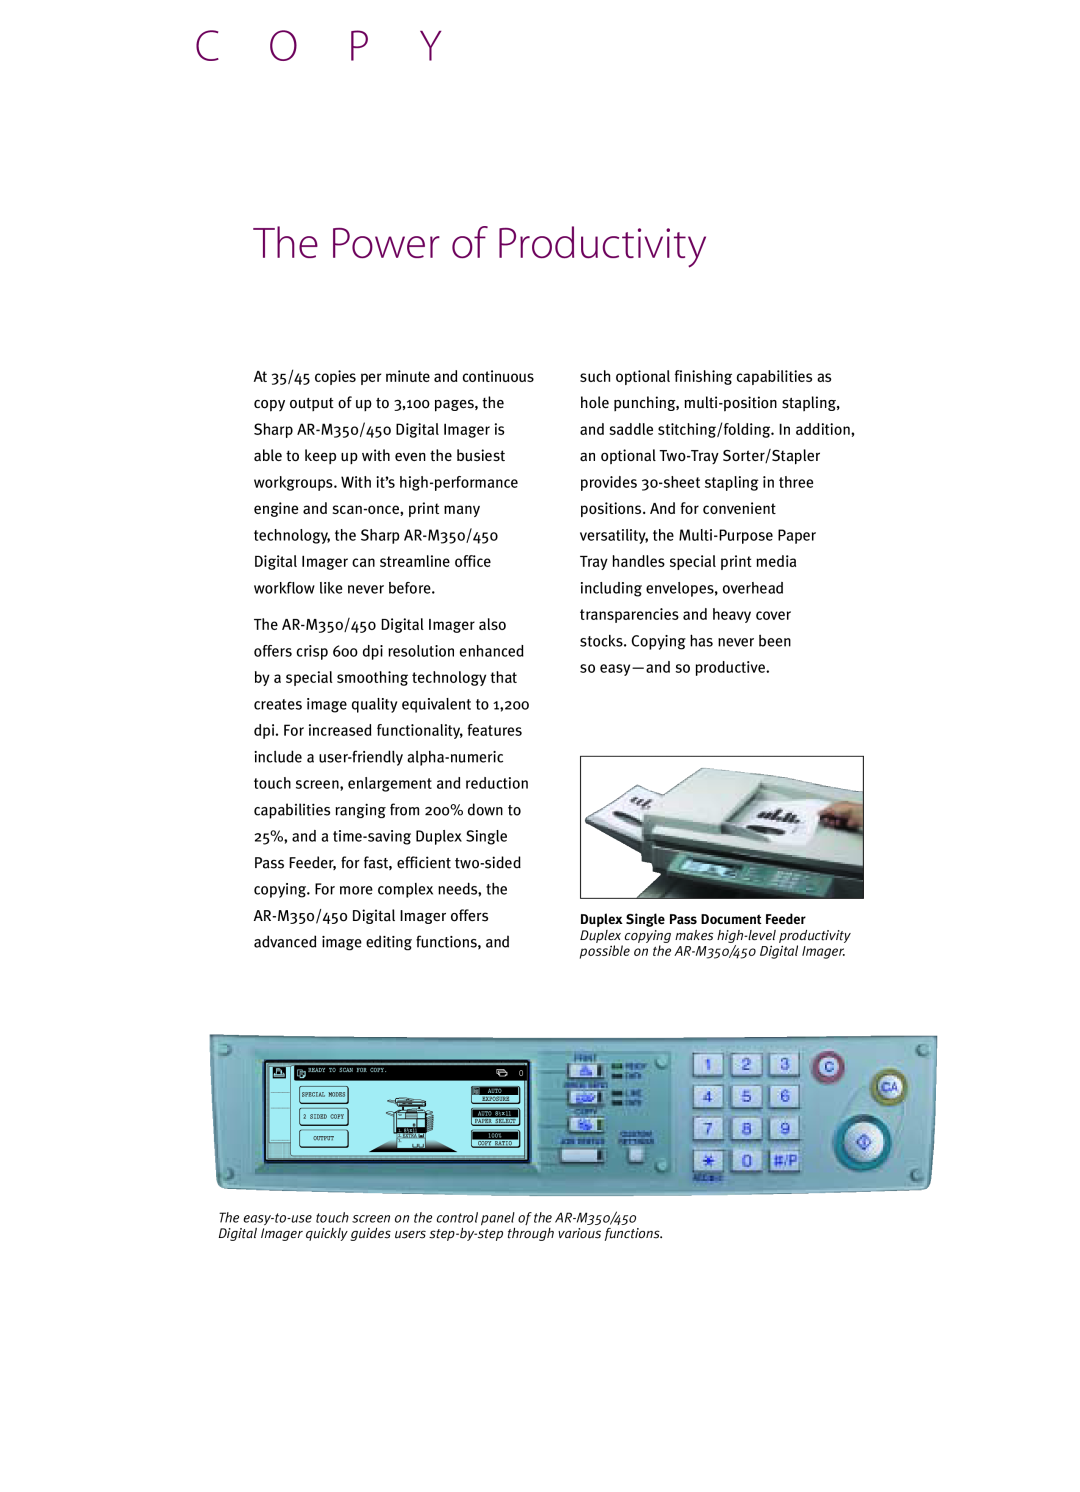 Sharp AR-M450, AR-M350 manual C O P Y The Power of Productivity, so easy-and so productive 